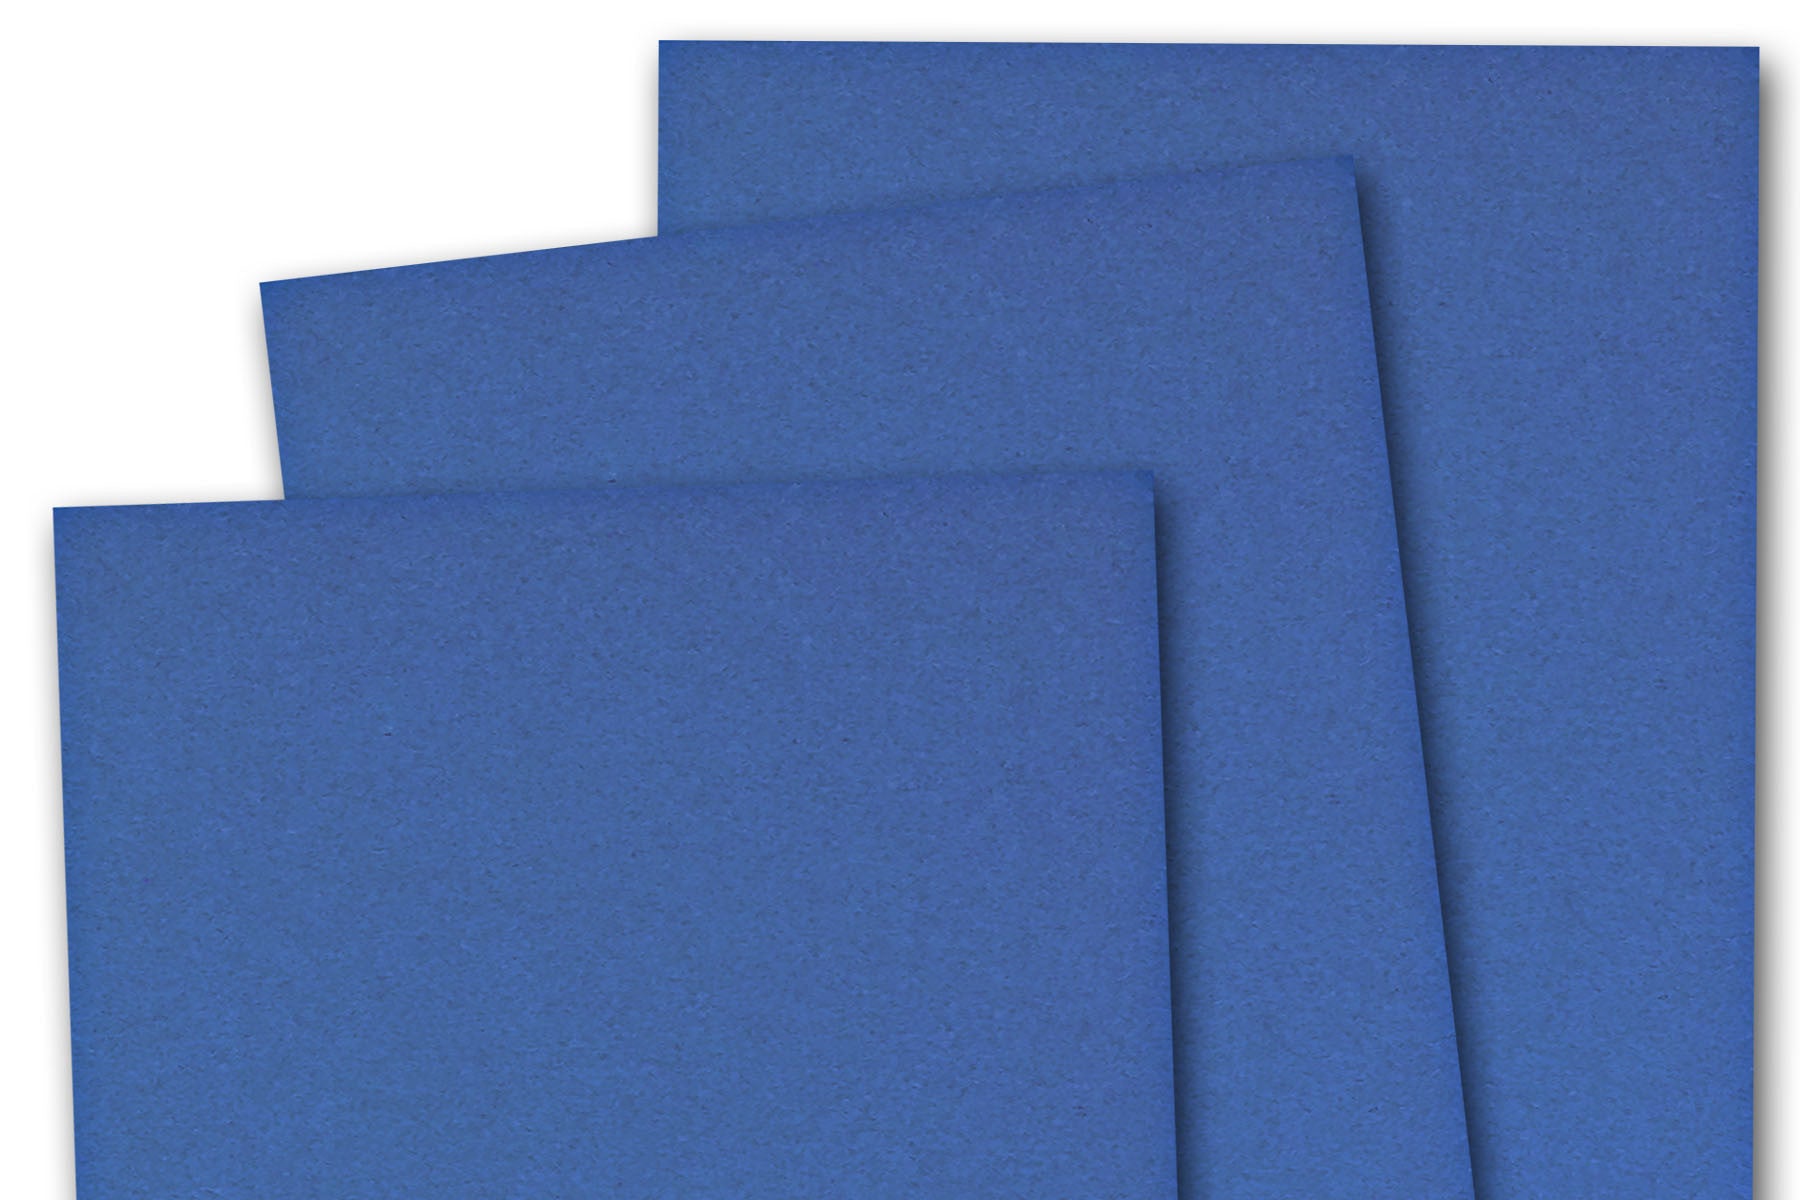 BASIS COLORS - 8.5 x 11 CARDSTOCK PAPER - White - 80LB COVER